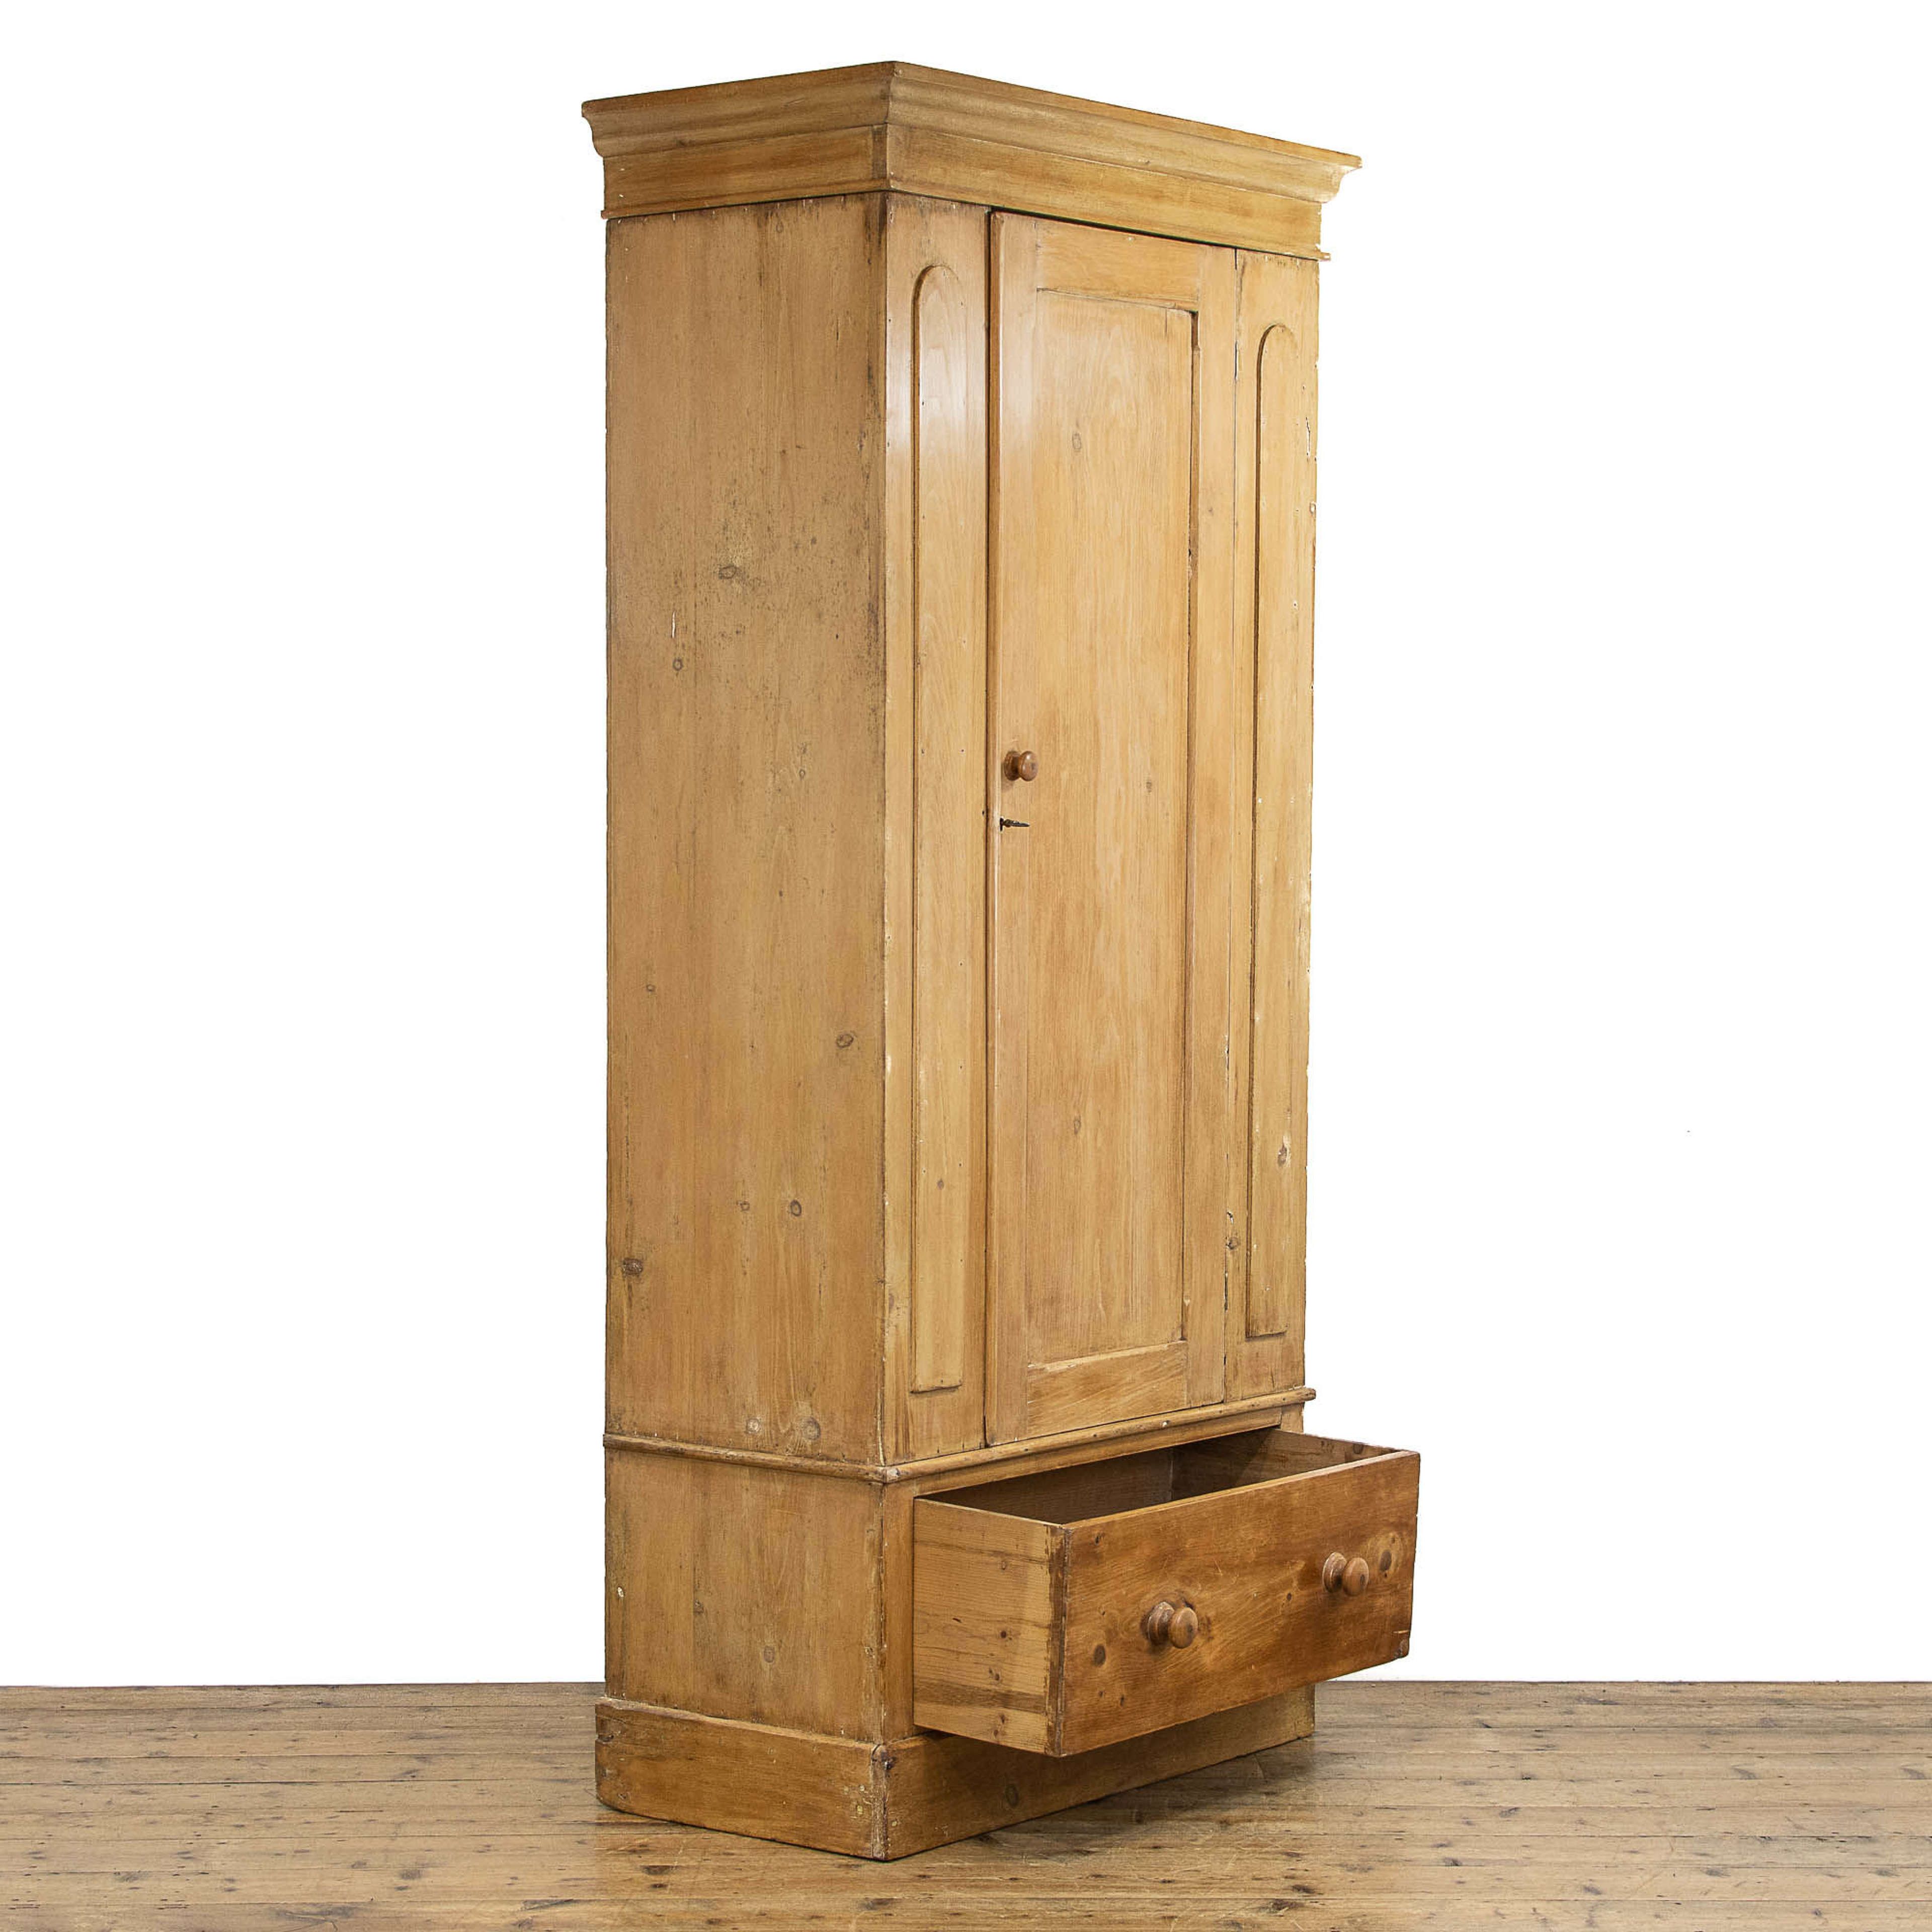 Victorian Stripped Pine Single Wardrobe In Antique Wardrobes & Armoires In Single Pine Wardrobes With Drawers (View 11 of 15)